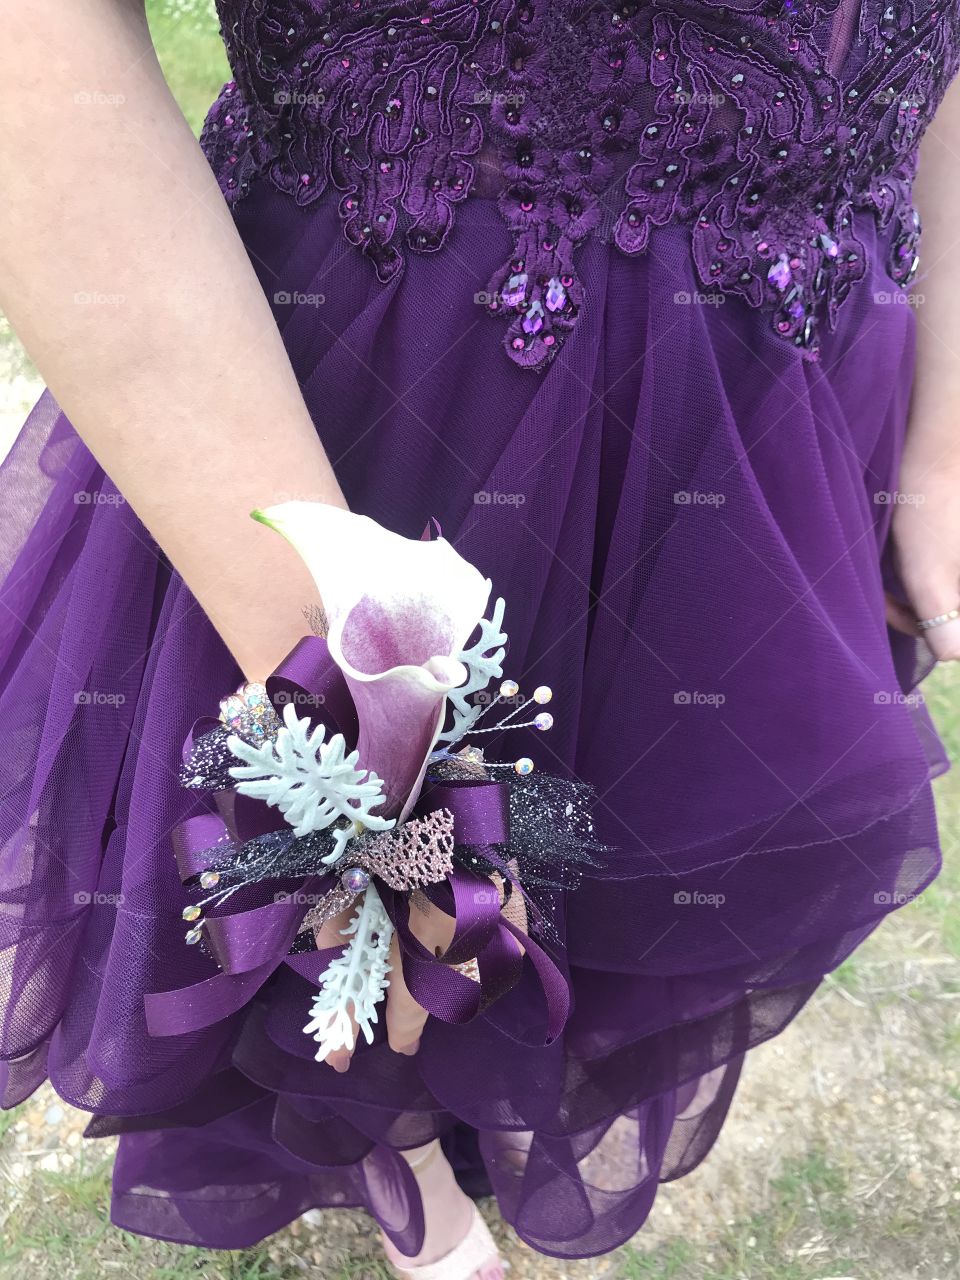 Senior prom was a night to remember with a beautiful dress and corsage.